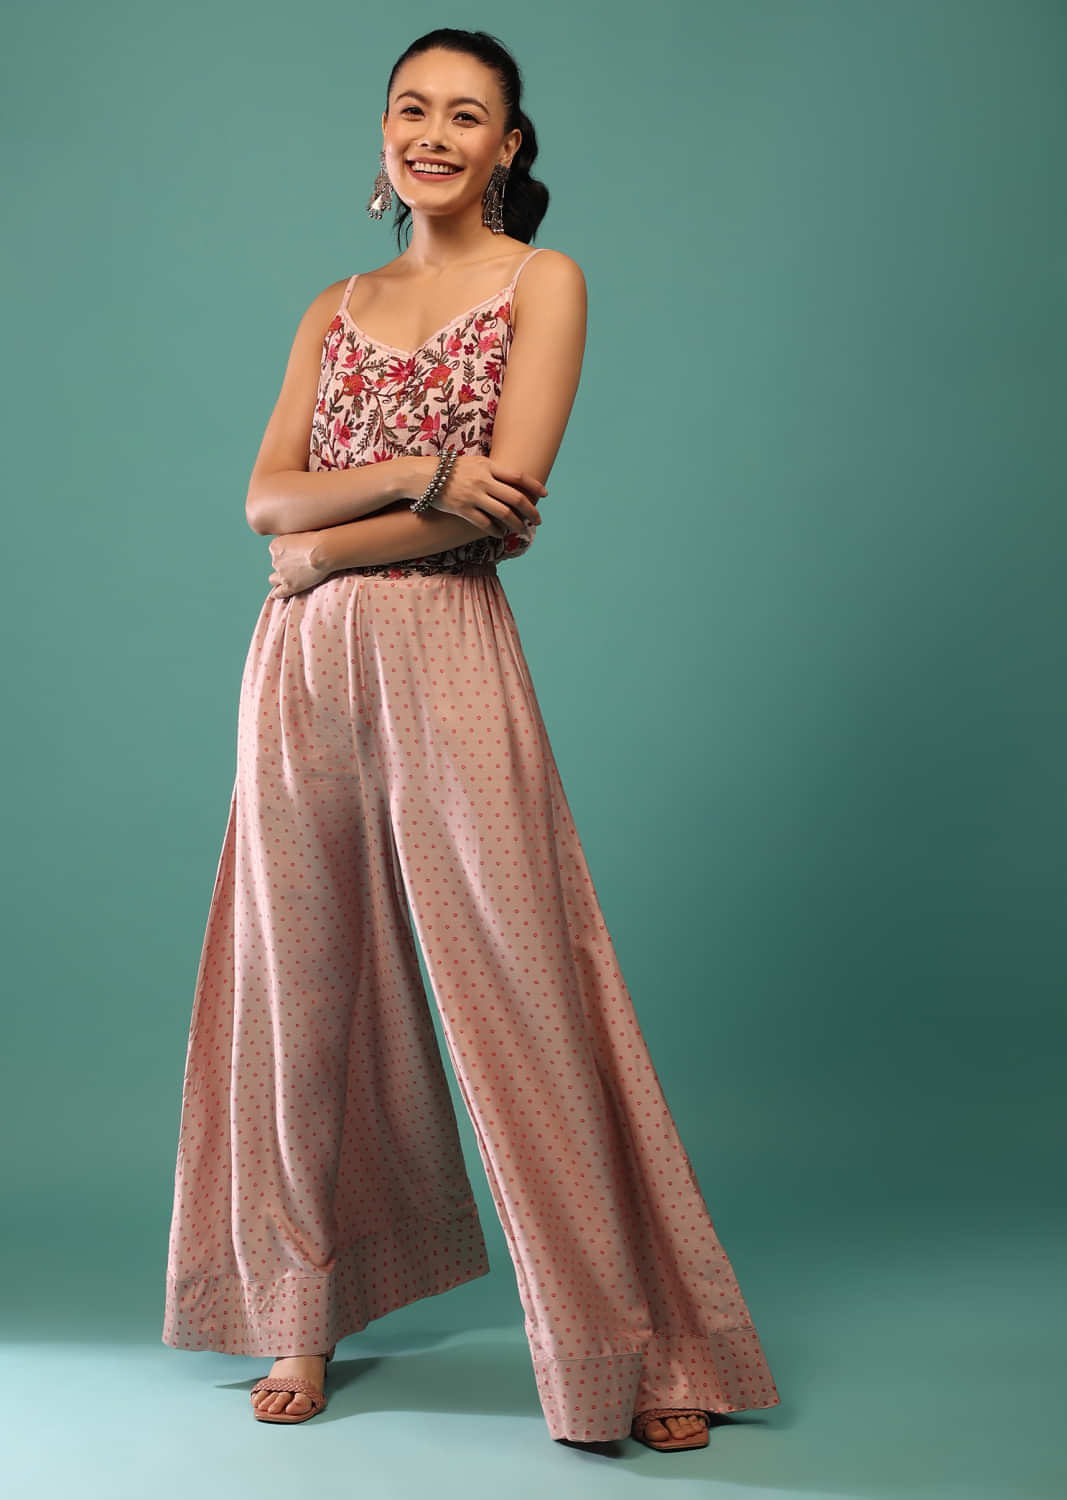 Pink Jumpsuit With Thread, Beads And Sequins In Floral Patterns